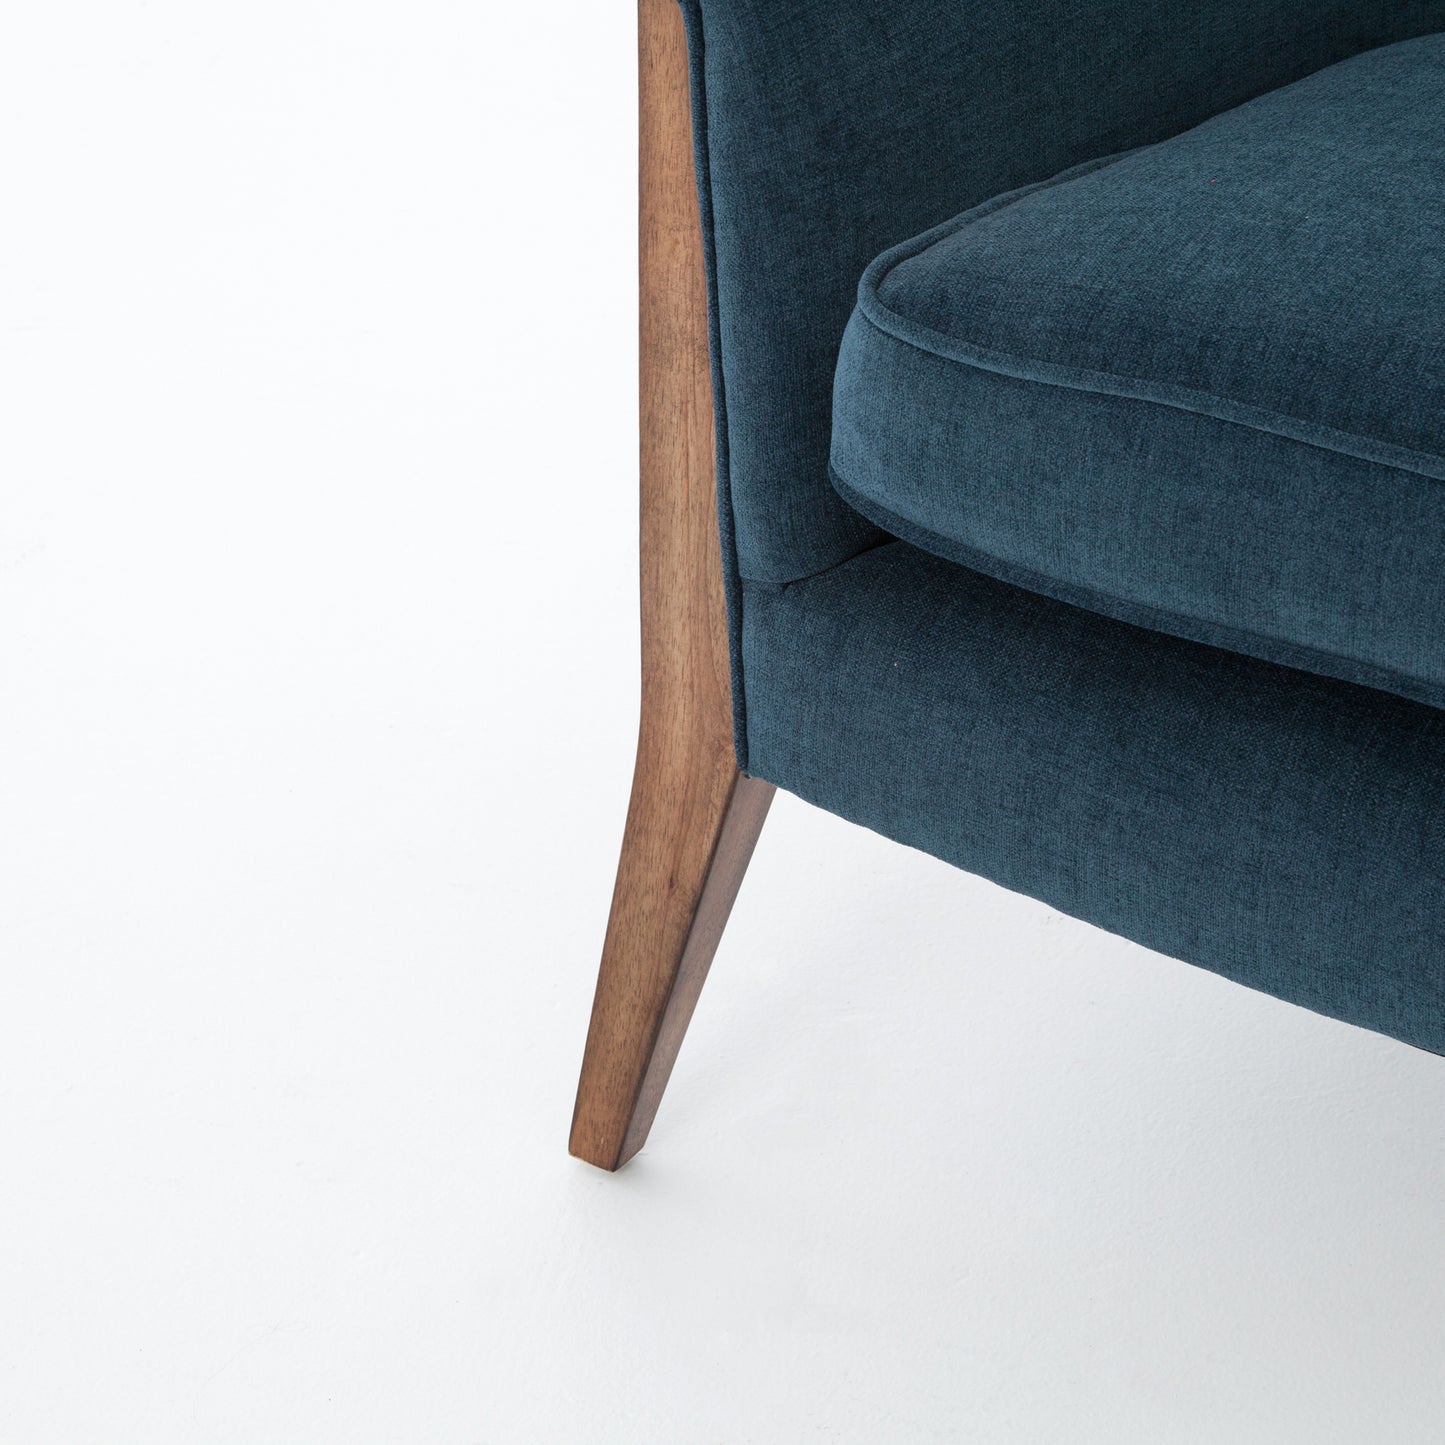 Load image into Gallery viewer, Nomad Chair - Plush Azure Lounge Chair Four Hands     Four Hands, Mid Century Modern Furniture, Old Bones Furniture Company, Old Bones Co, Modern Mid Century, Designer Furniture, https://www.oldbonesco.com/
